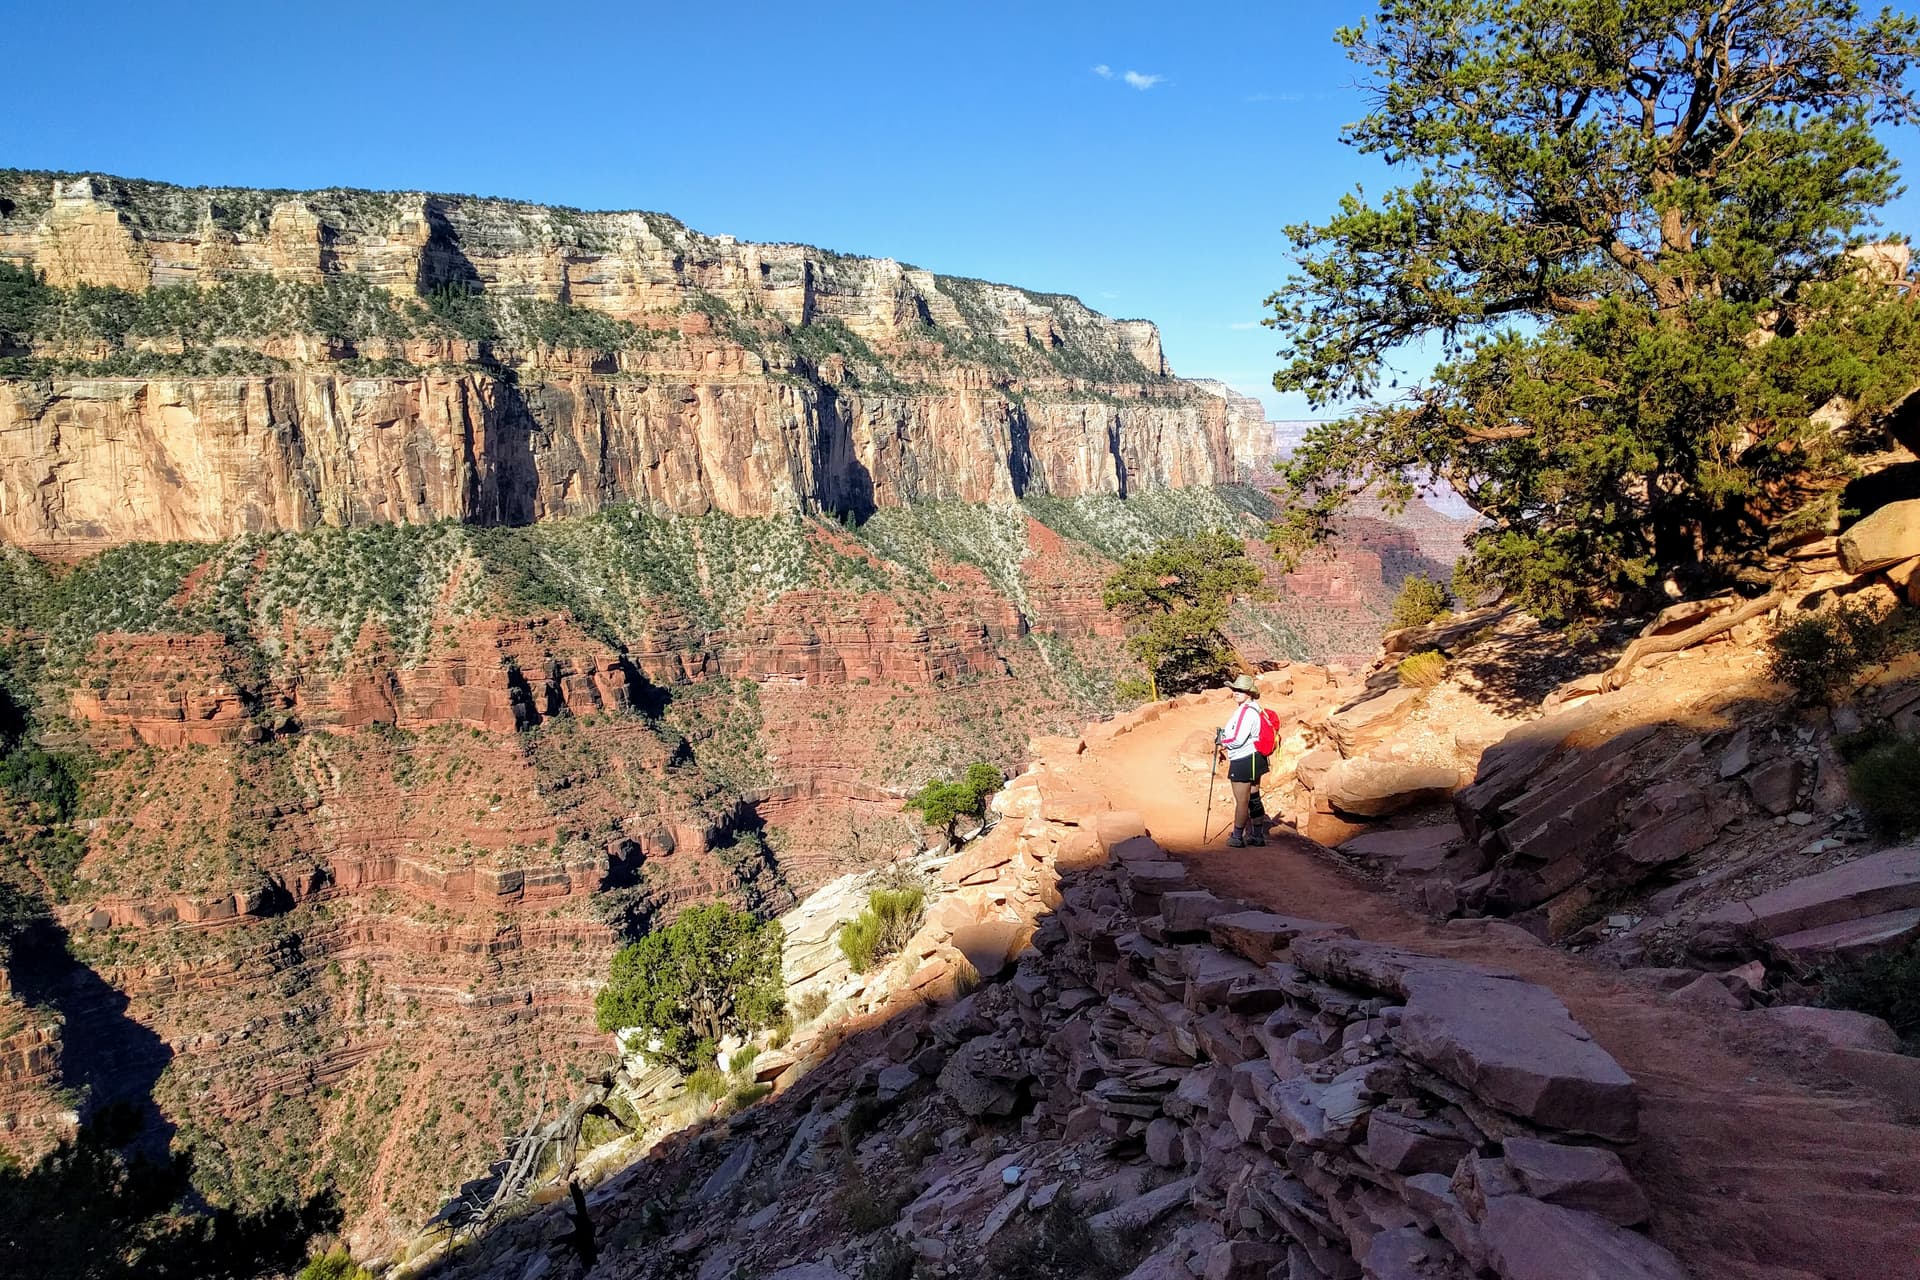 Len stands on a trail descending into the Grand Canyon from the South Rim. The shadow of the South Rim ends just before her, and in the background another part of the South Rim, composed of thick red and white sandstone bands, can be seen.